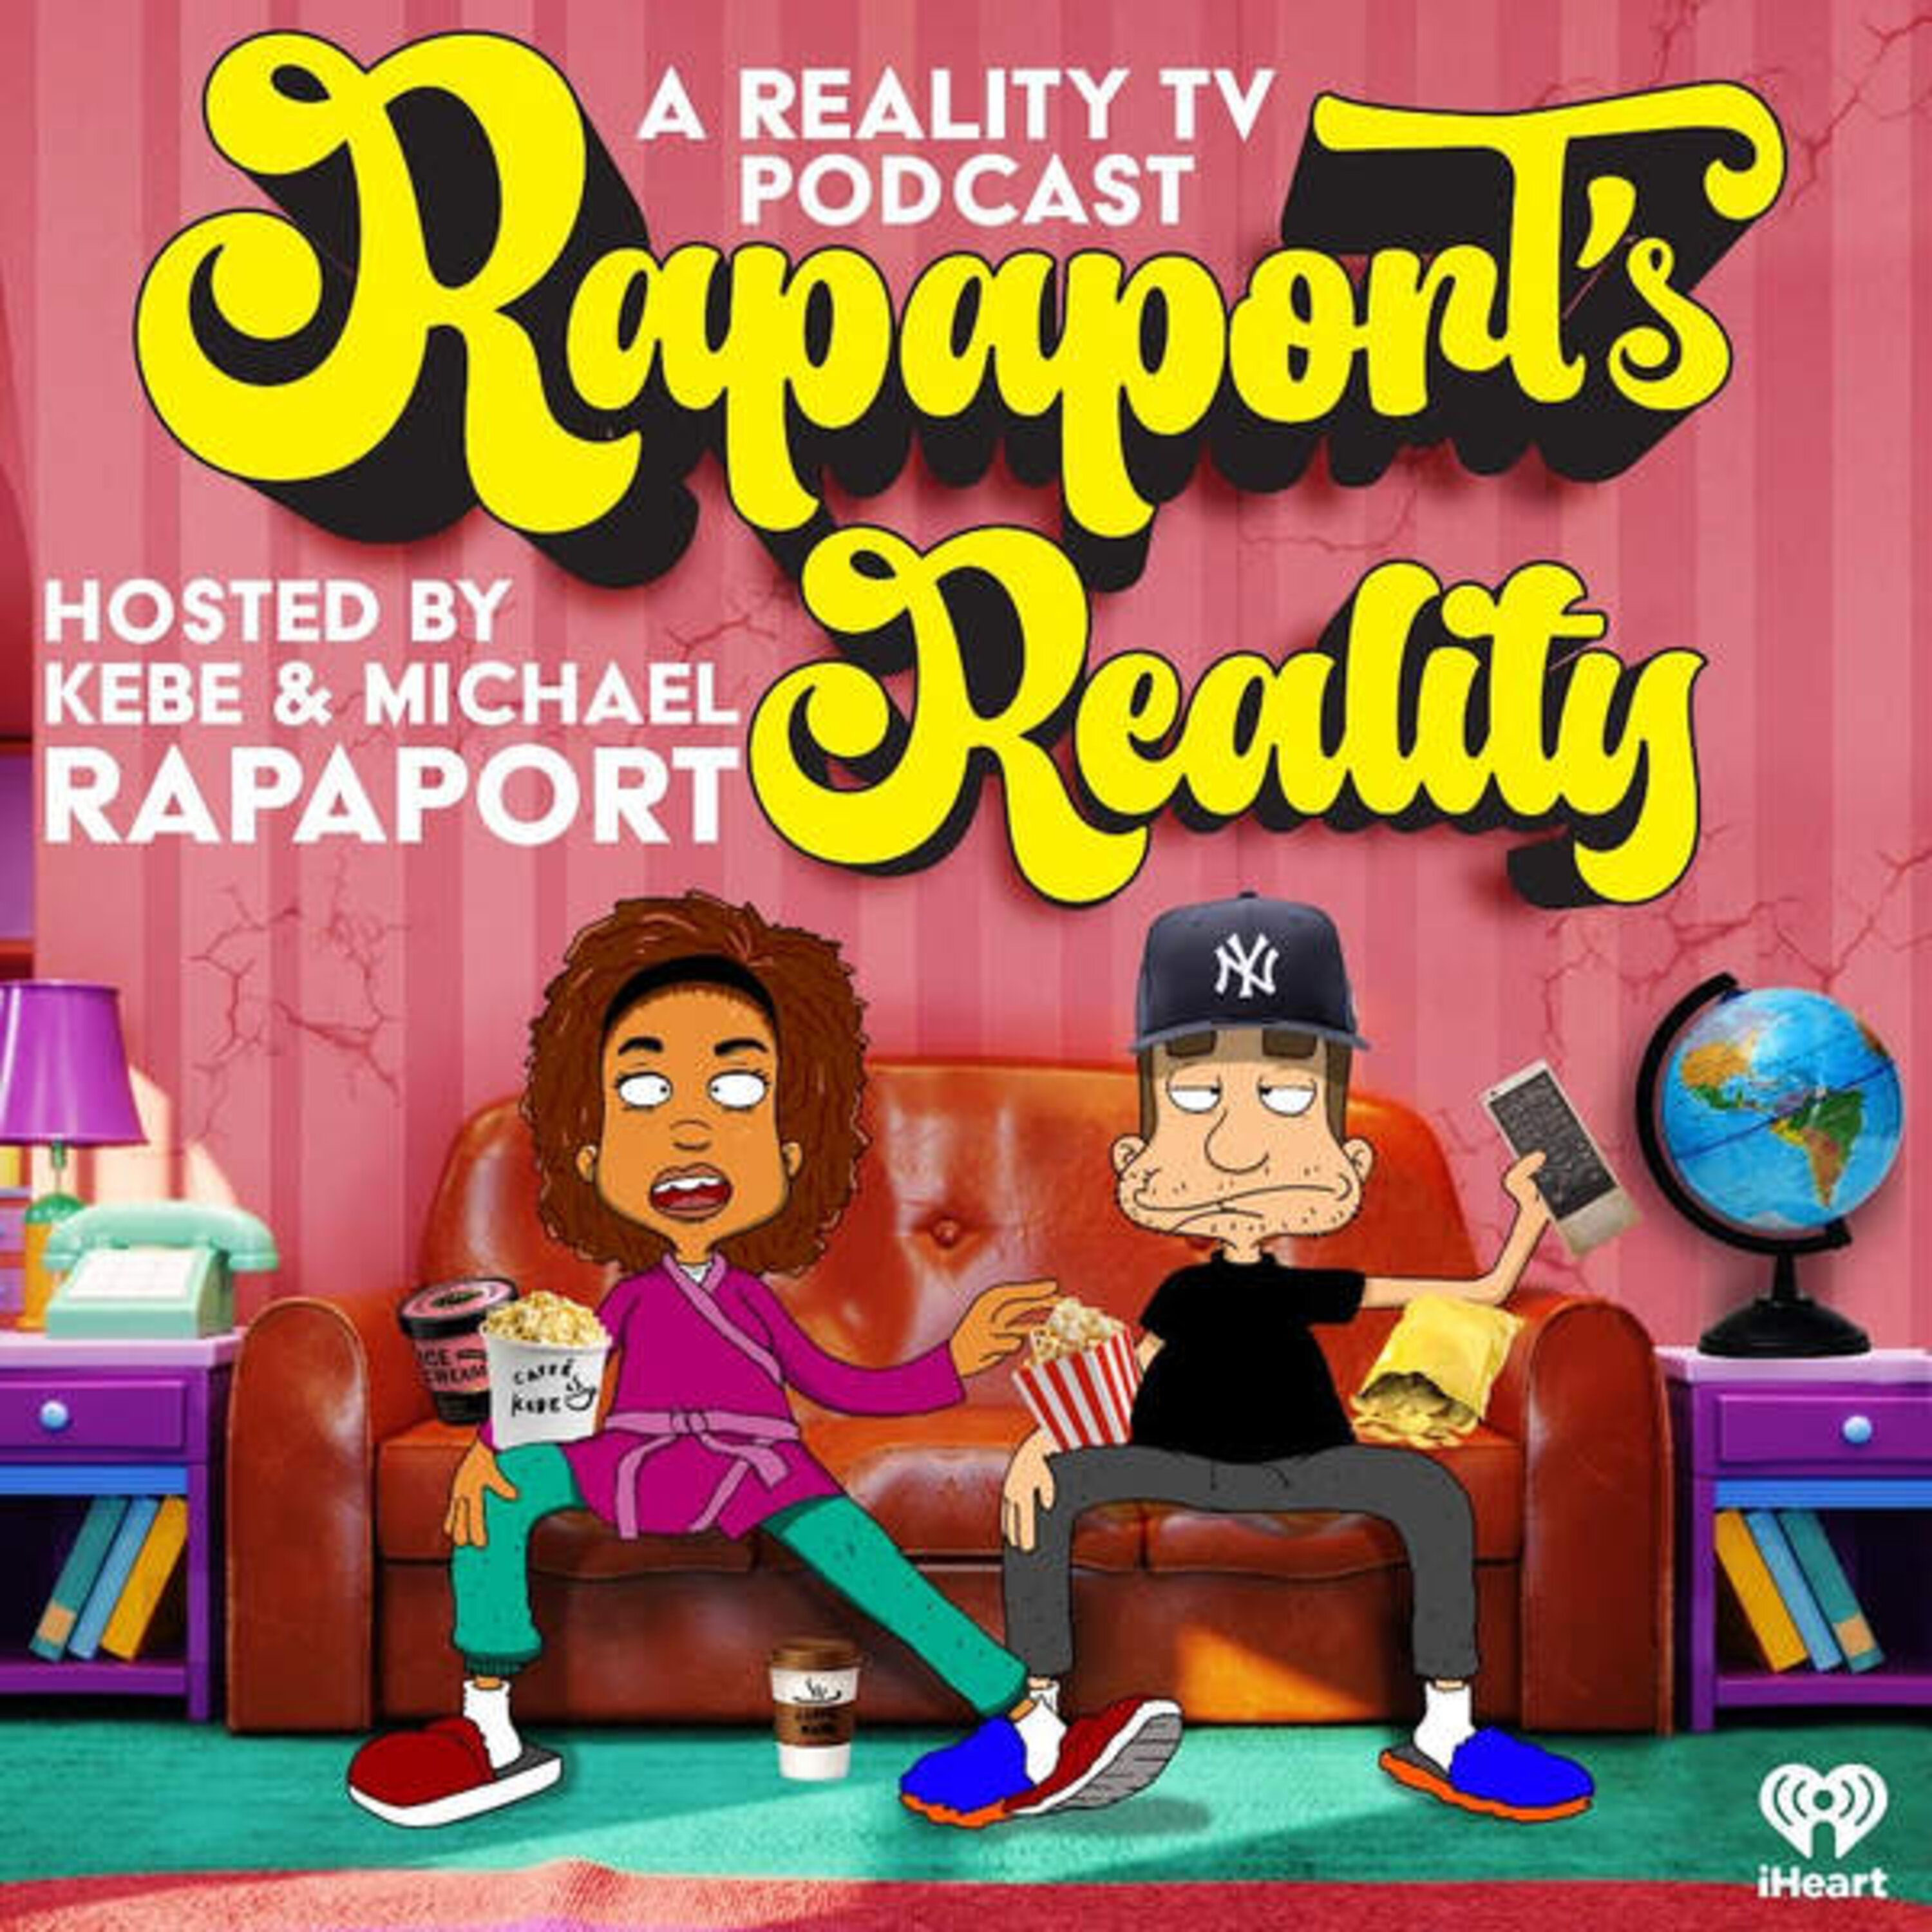 RAPAPORT’S REALITY EP 6 - PEOPLE’S MAGAZINE POWER COUPLE PROFILE ON THE RAPAPORT’S/SANDOVAL PODCAST INVITE/FIRED & HIRED/WHEN IS TOM TOM OPEN?